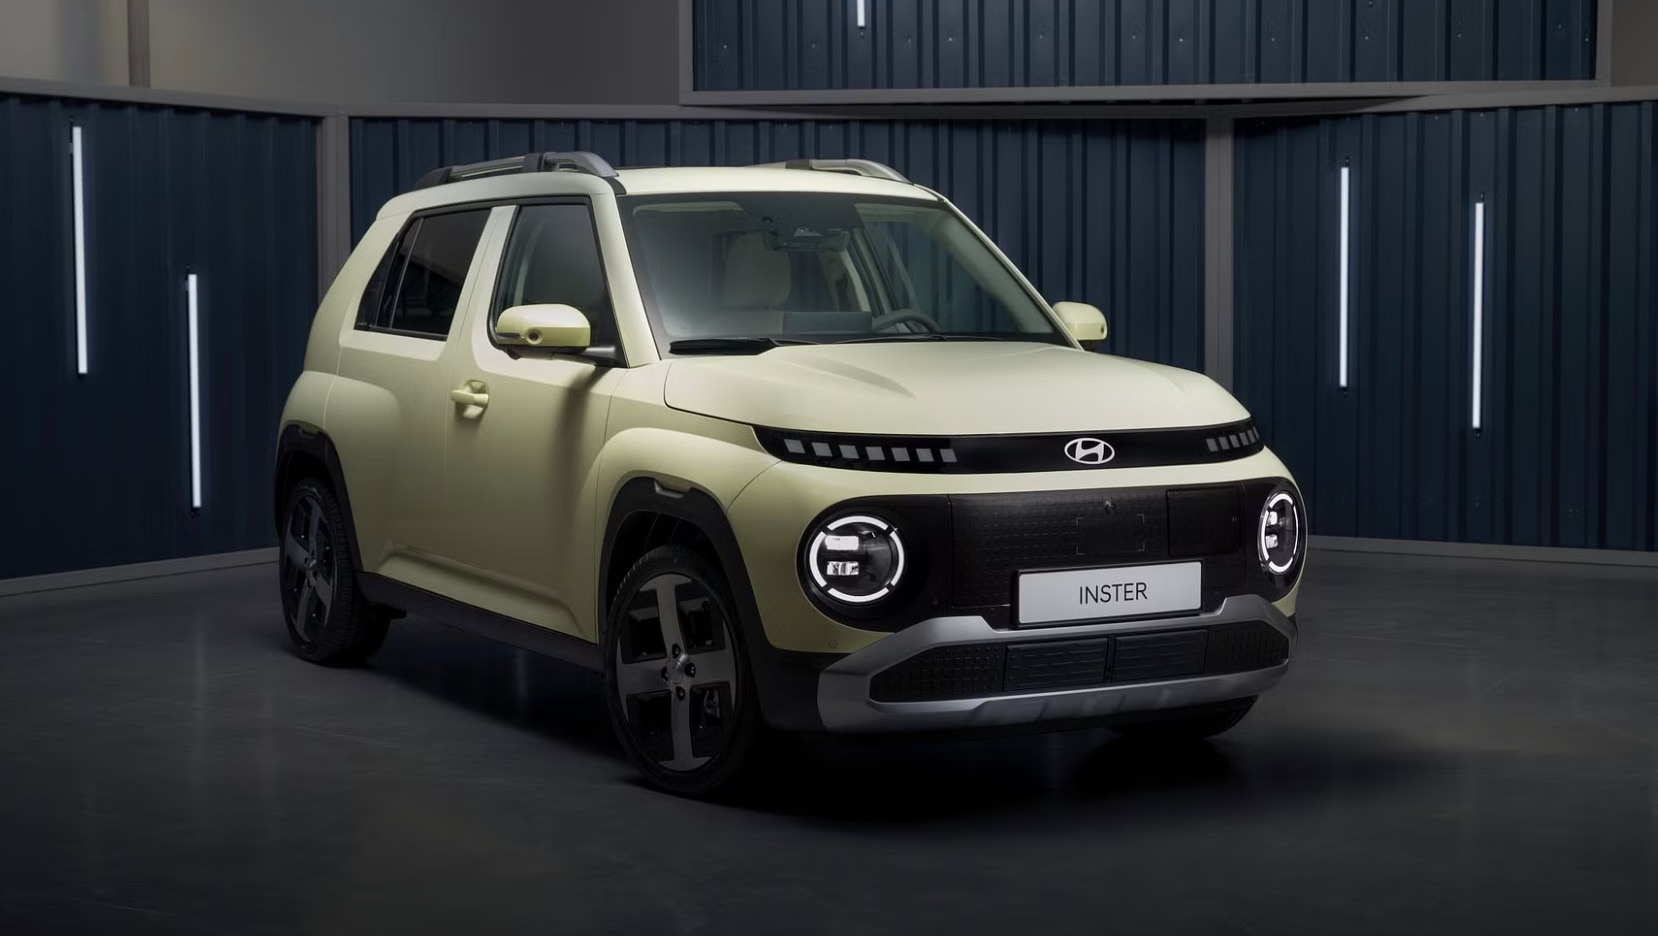 The new Hyundai Inster is a cool little electric car